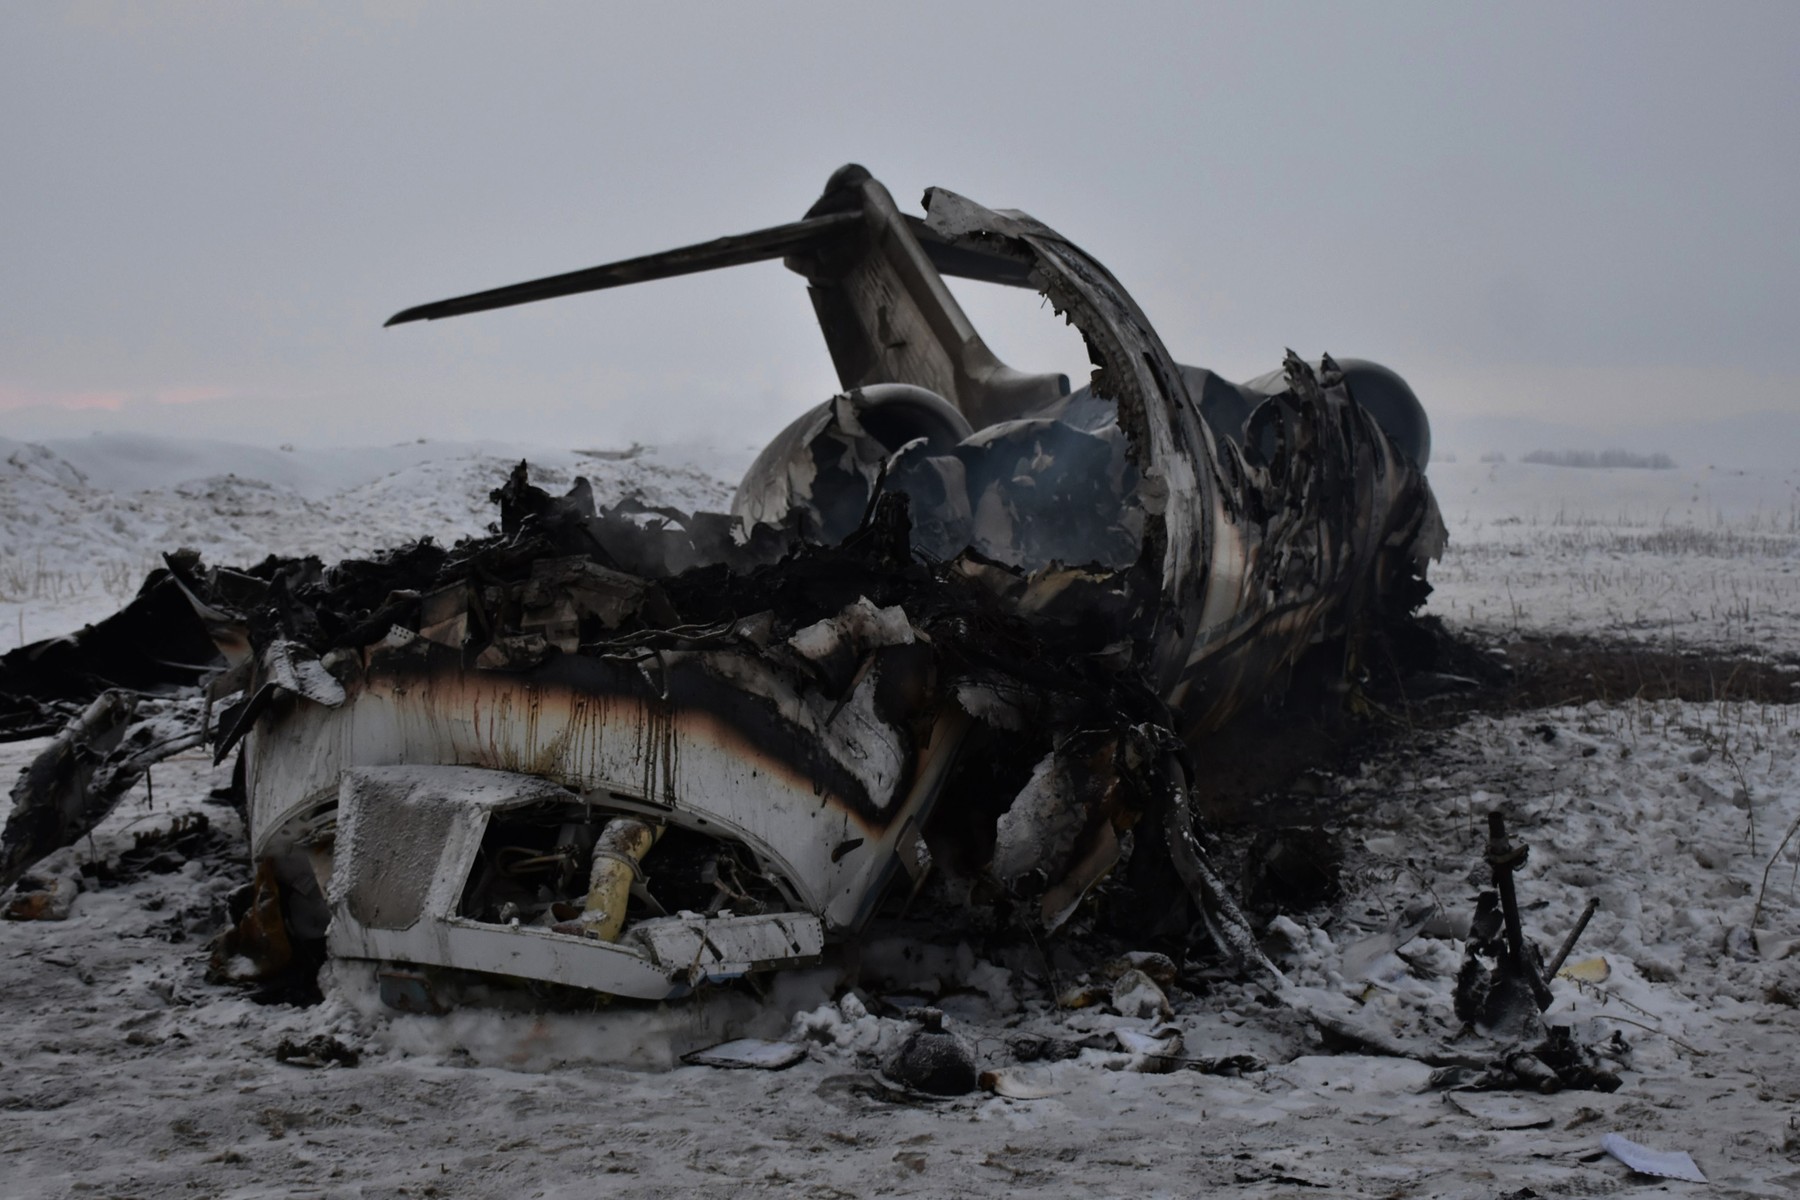 (200127) -- GHAZNI (AFGHANISTAN), Jan. 27, 2020  -- Photo taken on Jan. 27, 2020 shows the wreckage of the crashed plane in Deh Yak district of Ghazni province, Afghanistan. The Afghan Taliban claimed Monday that its fighters shot down a U.S. forces' aircraft in eastern Ghazni province. The U.S. military said on Monday that it is monitoring the situation following reports of a U.S. aircraft crash in Afghanistan. (Photo by Saifullah/, Image: 495194713, License: Rights-managed, Restrictions: WORLDWIDE RIGHTS AVAILABLE EXCLUDING CHINA, HONG KONG ONLY. End users shall not licence, sell, transmit, or otherwise distribute any photographs represented by eyevine, to any third party. Contact eyevine for more information: Tel: +44 (0) 20 8709 8709 Ema, Model Release: no, Credit line: Xinhua / Eyevine / Profimedia